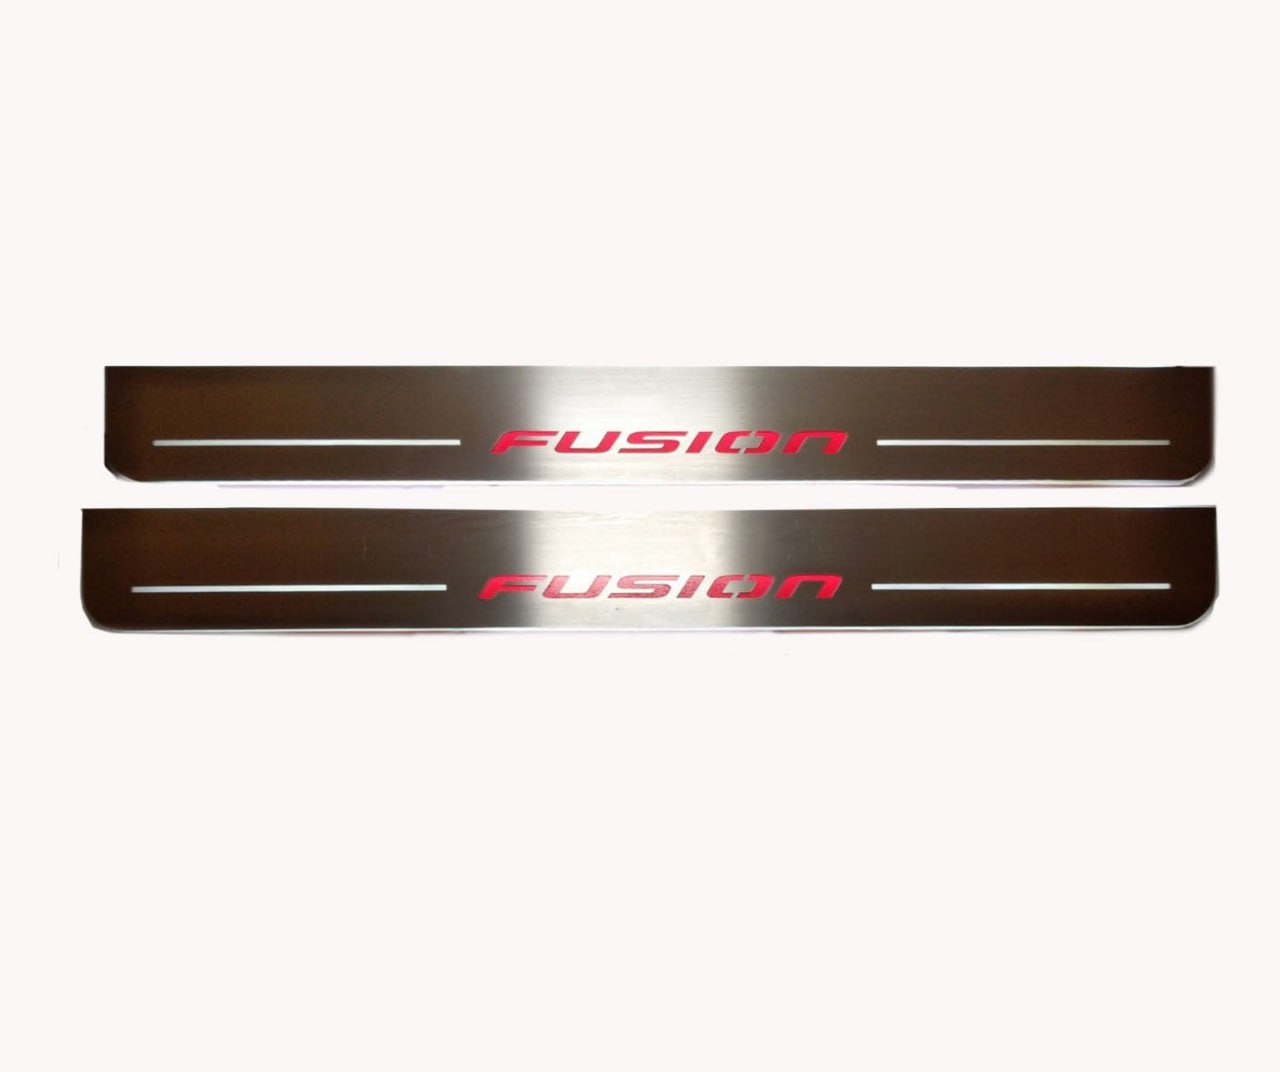 Ford Fusion 2012+ LED Door Sills PRO With FUSION Logo